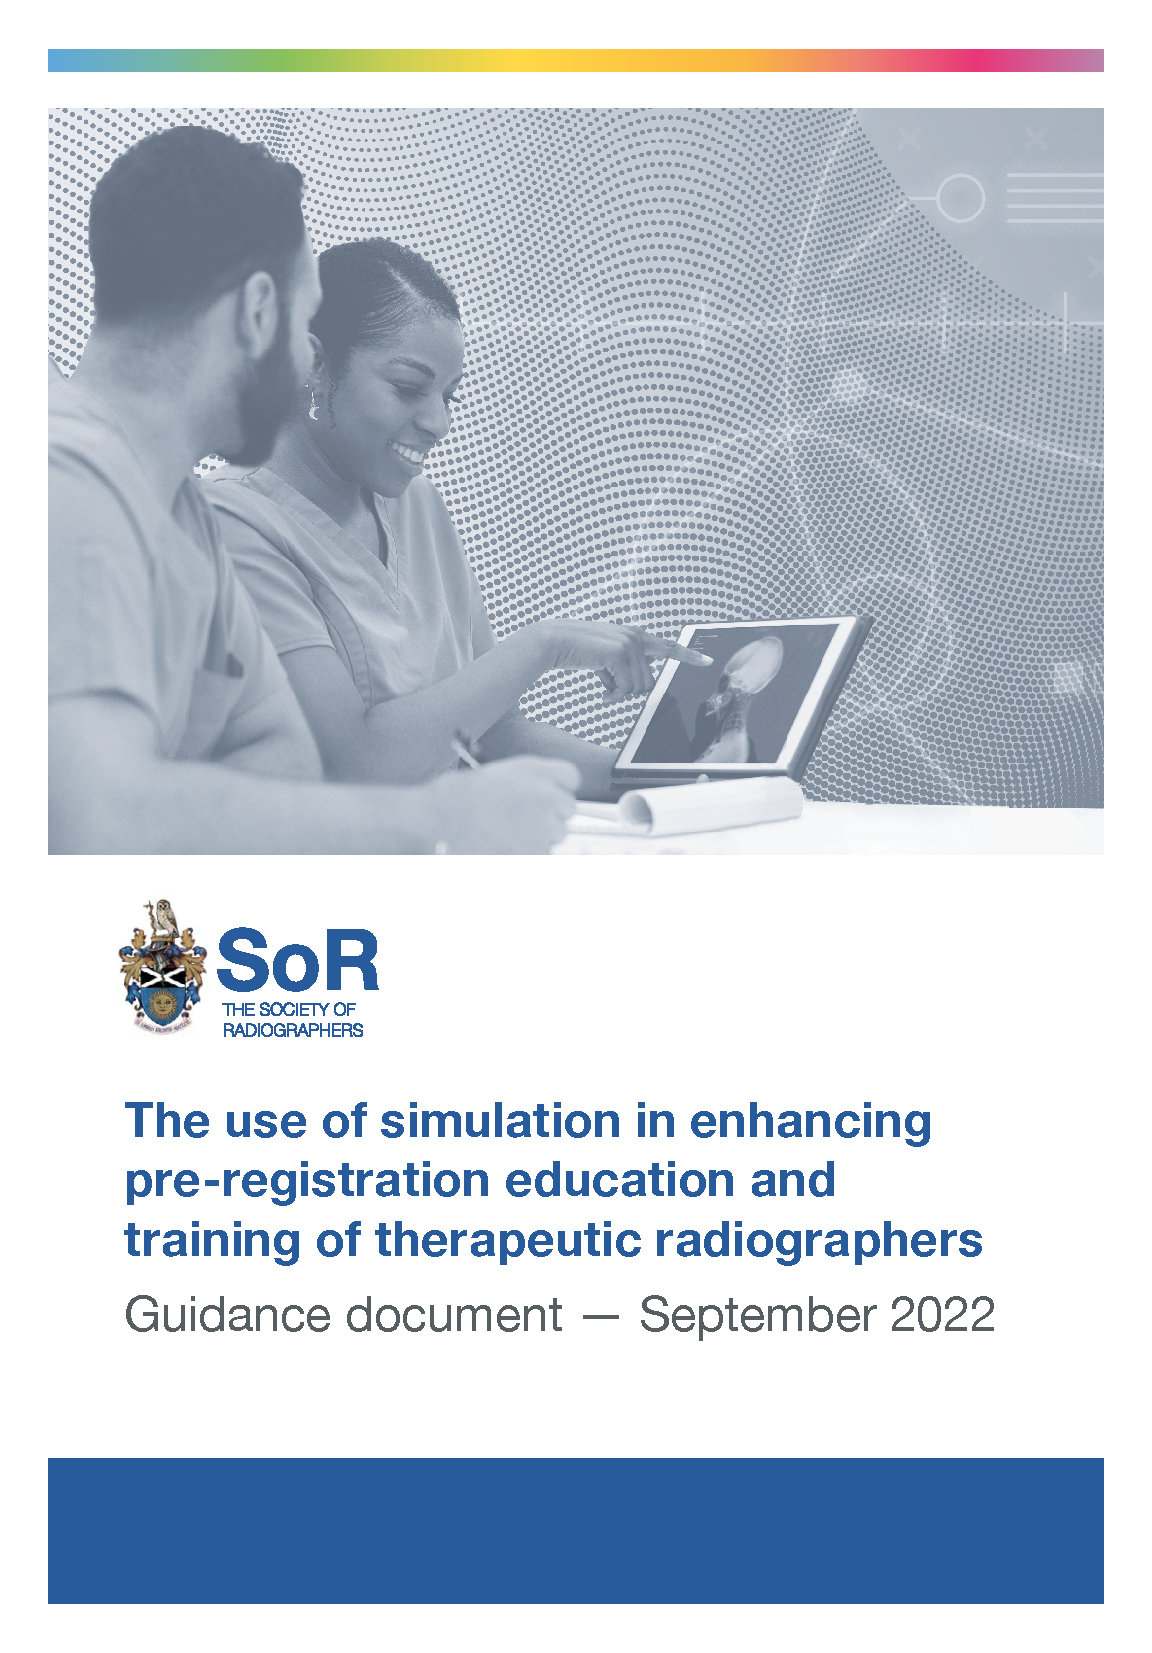 The use of simulation in enhancing pre-registration education and training of therapeutic radiographers